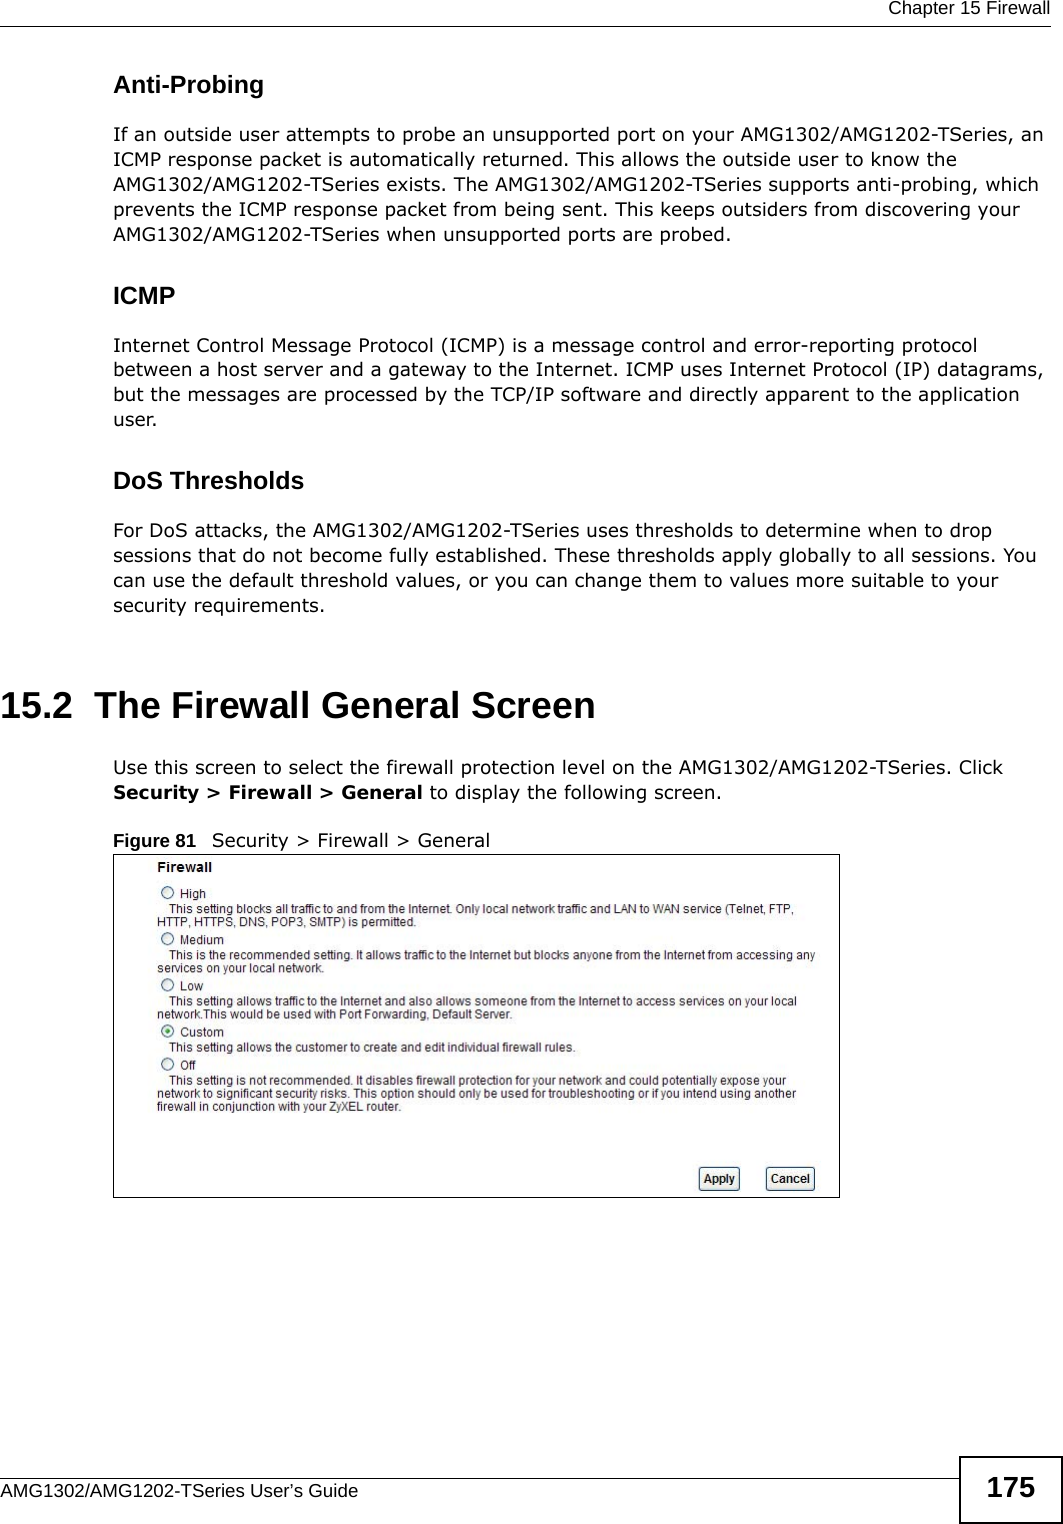  Chapter 15 FirewallAMG1302/AMG1202-TSeries User’s Guide 175Anti-ProbingIf an outside user attempts to probe an unsupported port on your AMG1302/AMG1202-TSeries, an ICMP response packet is automatically returned. This allows the outside user to know the AMG1302/AMG1202-TSeries exists. The AMG1302/AMG1202-TSeries supports anti-probing, which prevents the ICMP response packet from being sent. This keeps outsiders from discovering your AMG1302/AMG1202-TSeries when unsupported ports are probed. ICMPInternet Control Message Protocol (ICMP) is a message control and error-reporting protocol between a host server and a gateway to the Internet. ICMP uses Internet Protocol (IP) datagrams, but the messages are processed by the TCP/IP software and directly apparent to the application user. DoS ThresholdsFor DoS attacks, the AMG1302/AMG1202-TSeries uses thresholds to determine when to drop sessions that do not become fully established. These thresholds apply globally to all sessions. You can use the default threshold values, or you can change them to values more suitable to your security requirements.15.2  The Firewall General ScreenUse this screen to select the firewall protection level on the AMG1302/AMG1202-TSeries. Click Security &gt; Firewall &gt; General to display the following screen.Figure 81   Security &gt; Firewall &gt; General